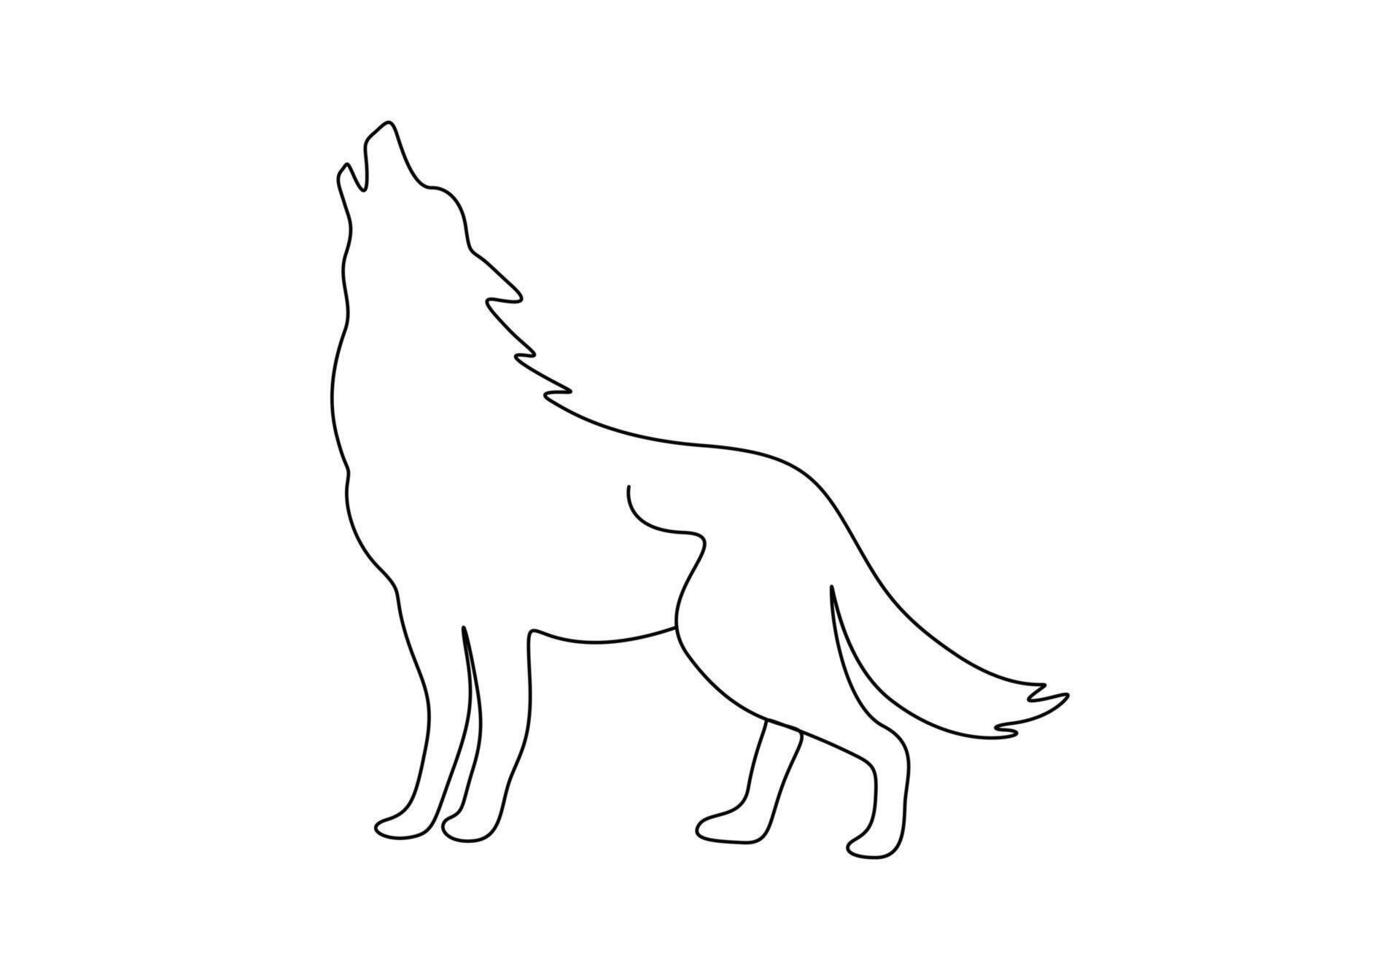 Wolf in one continuous line drawing vector illustration